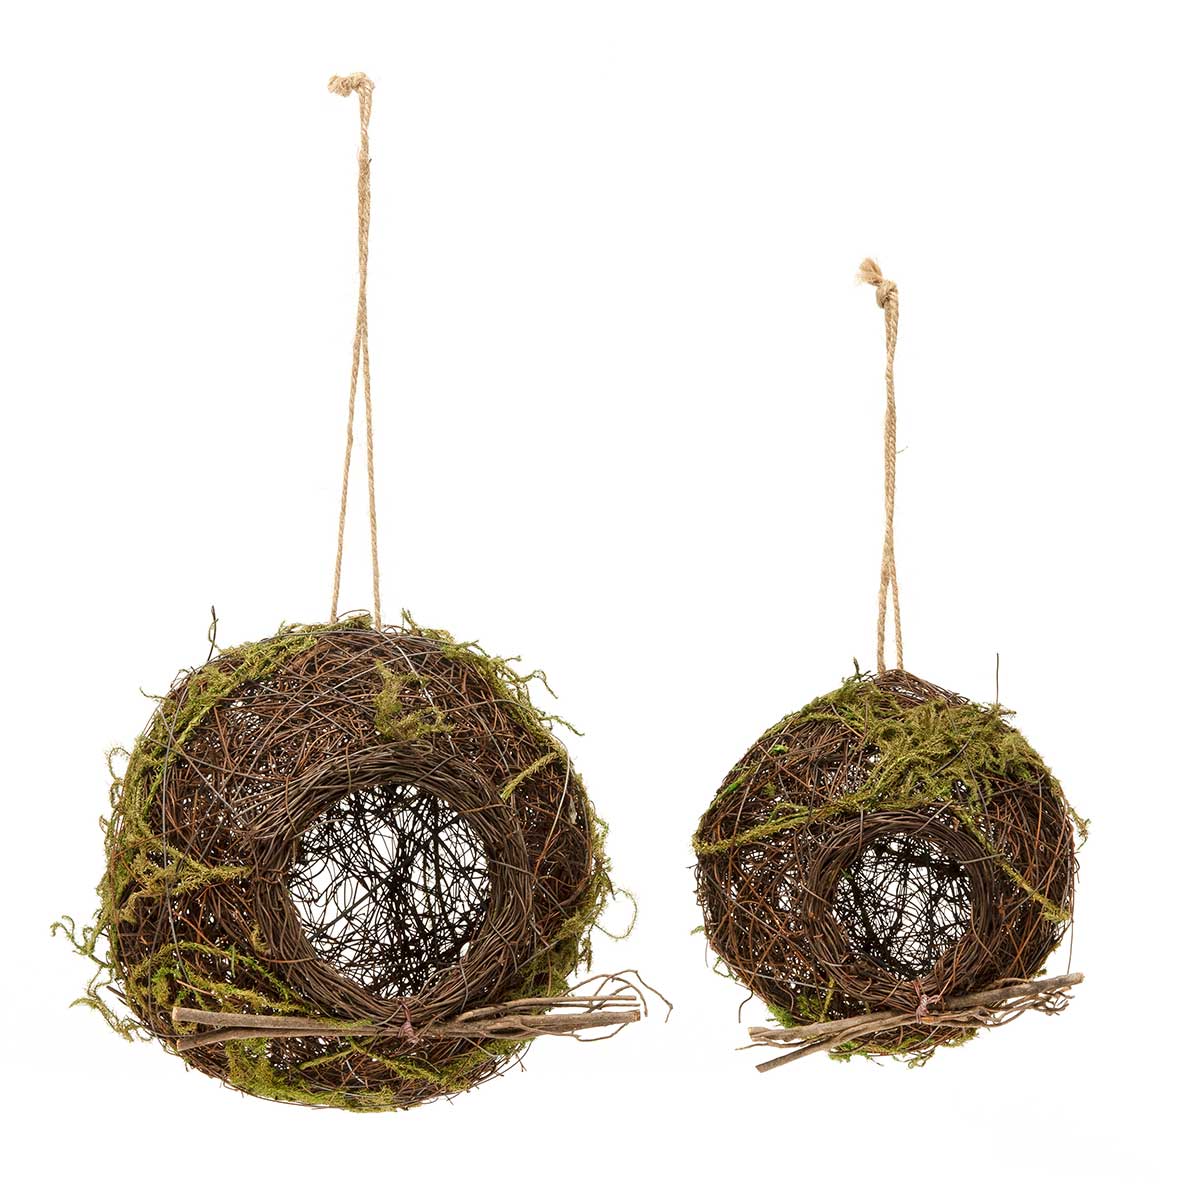 TWIG NEST BALL SMALL 6IN X 5.5IN BROWN/GREEN